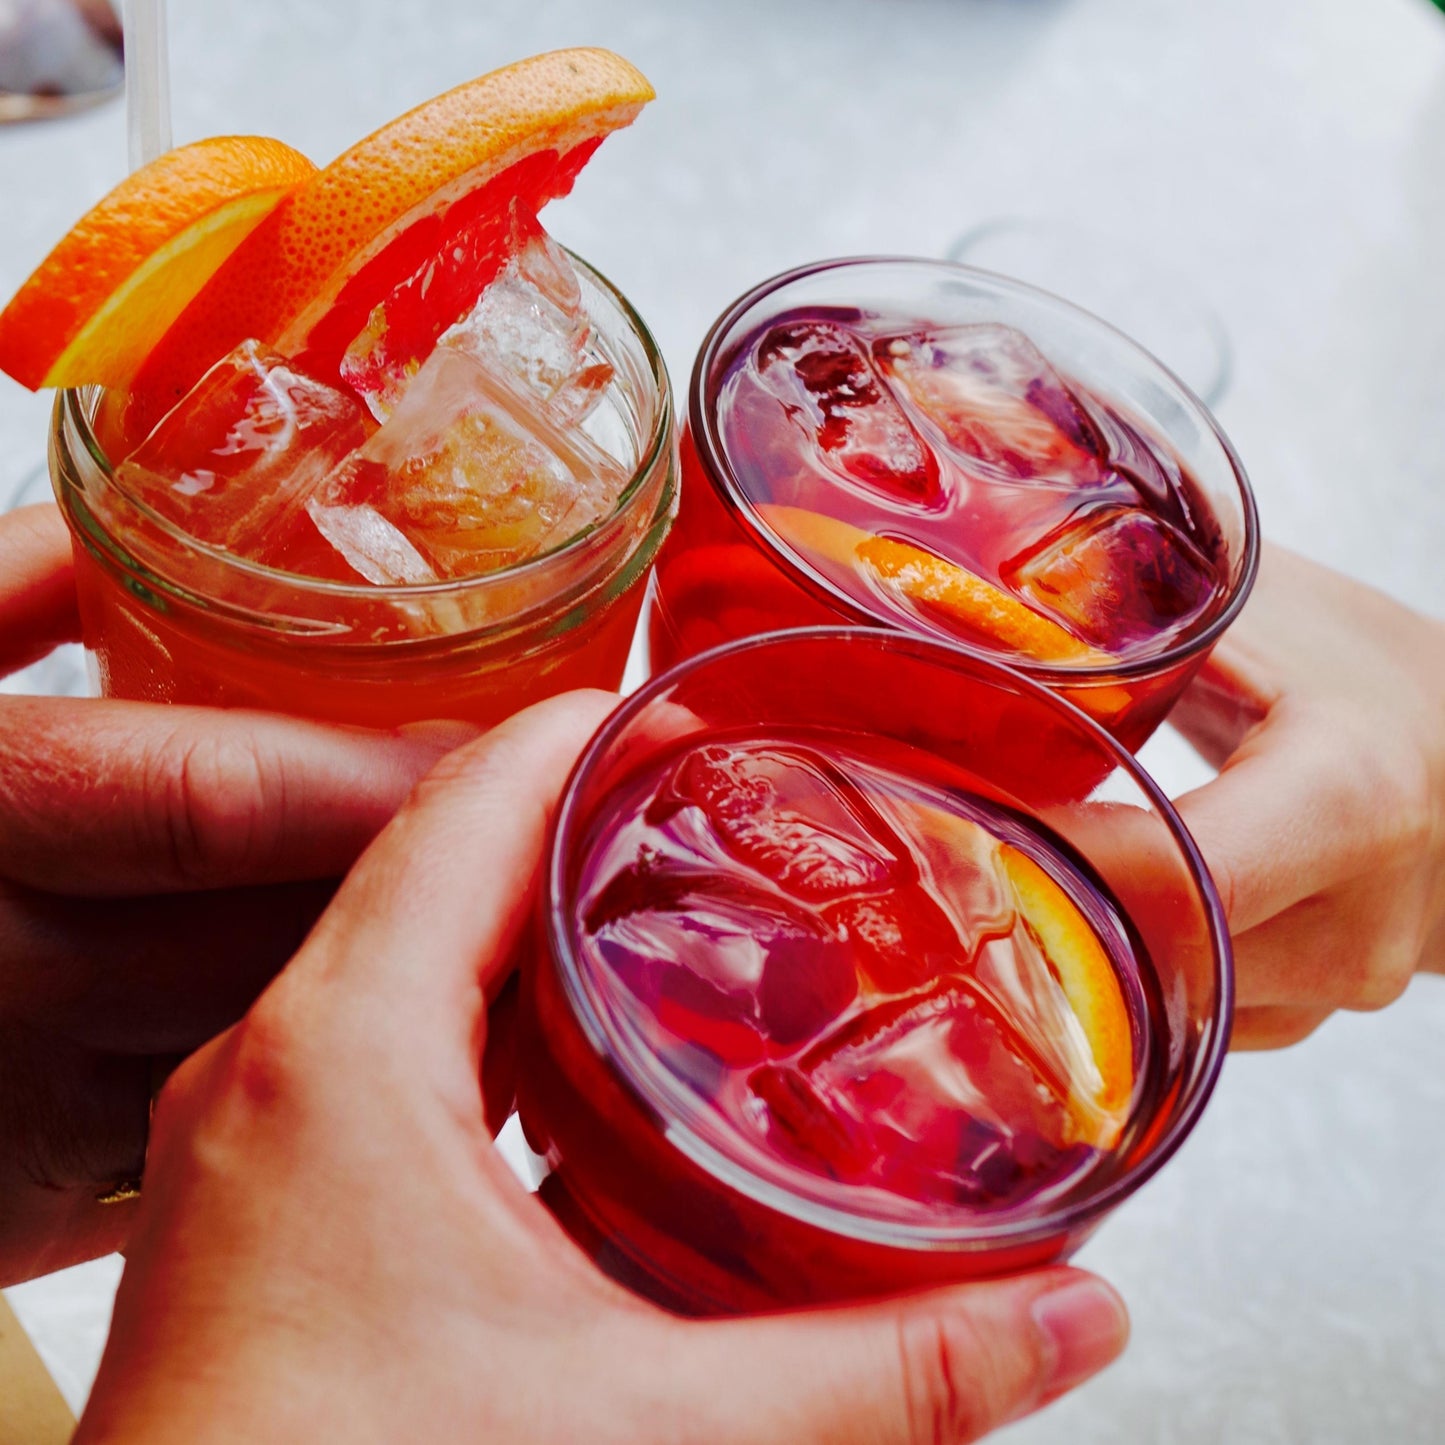 The negroni comes of age